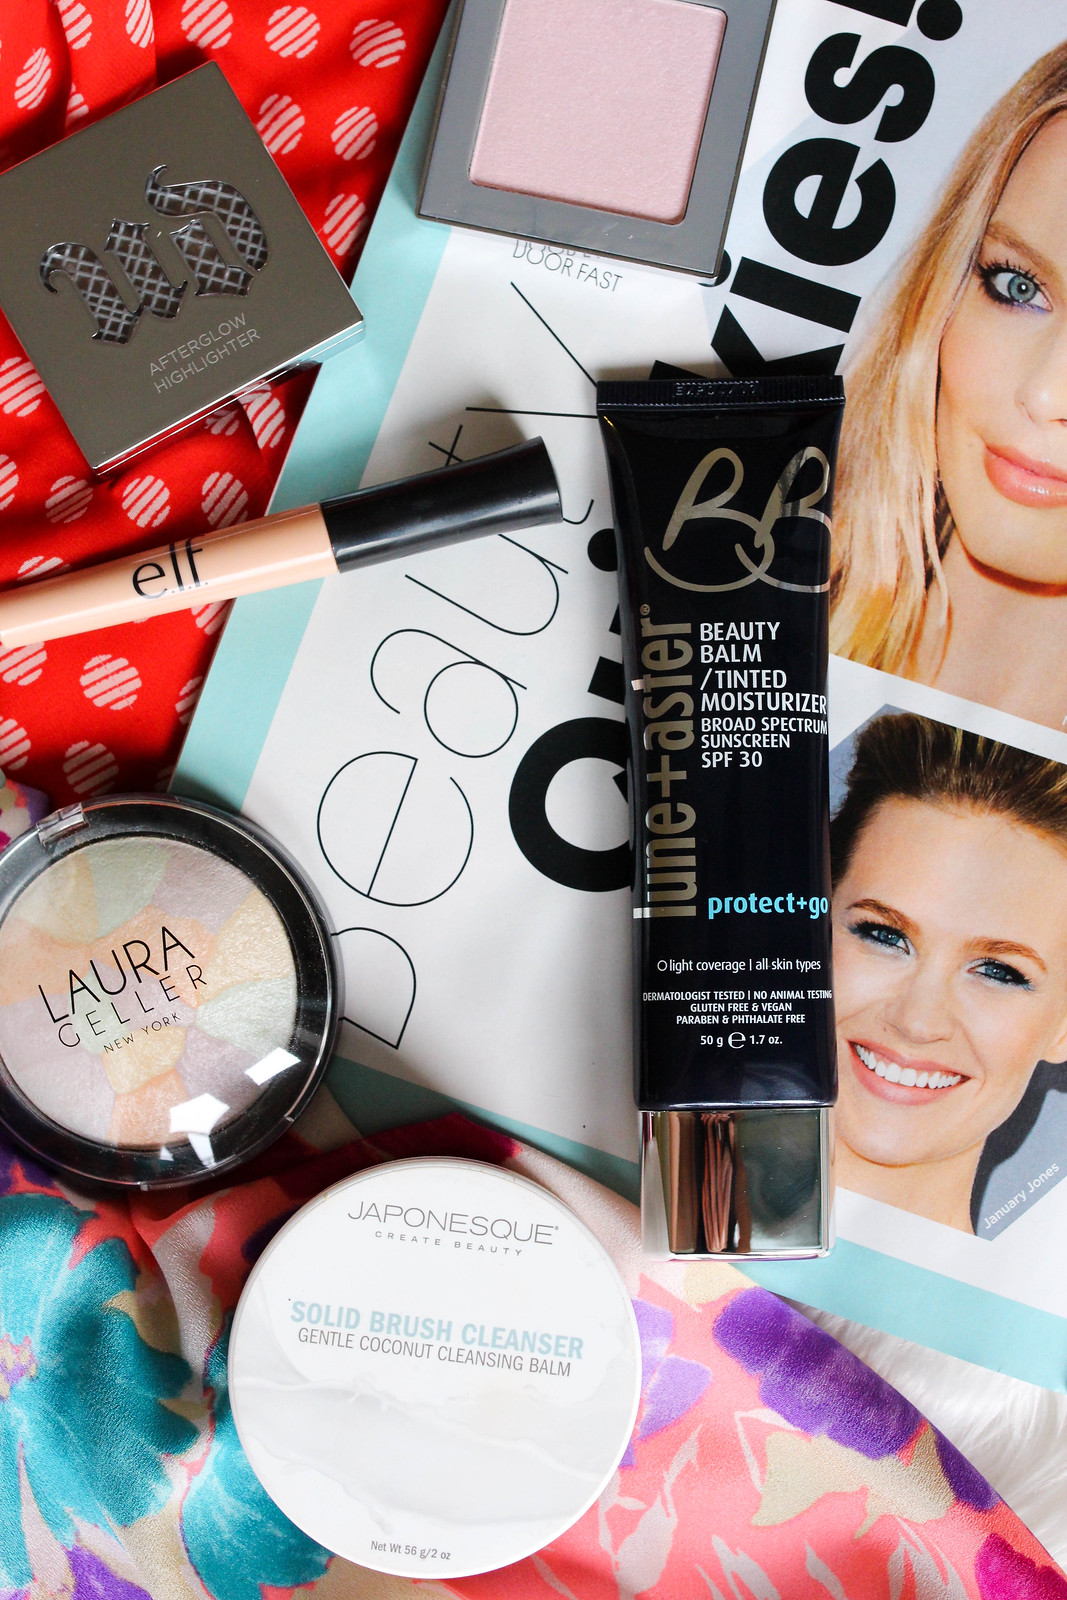 My July Beauty Essentials on Living After Midnite